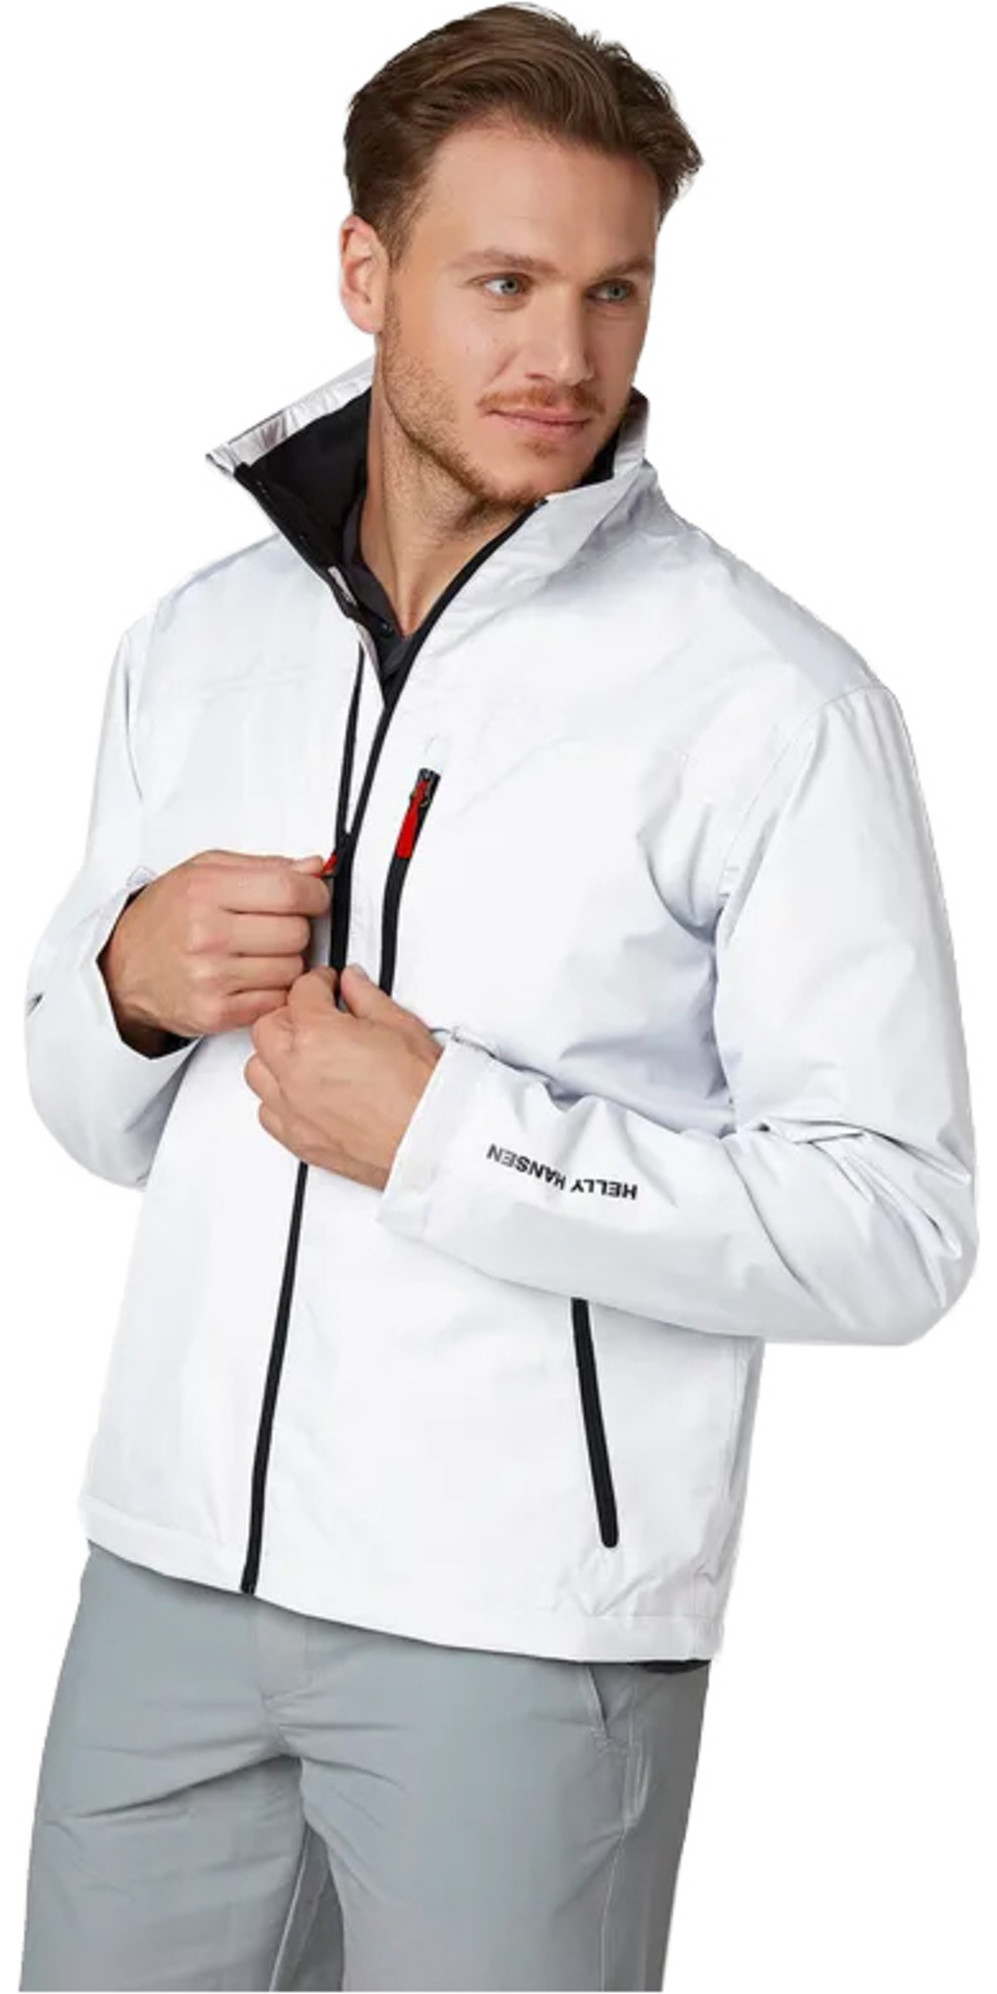 2023 Helly Hansen Crew Jacket WHITE 30263 - Sailing - Sailing Yacht - Shore | Watersports Outlet